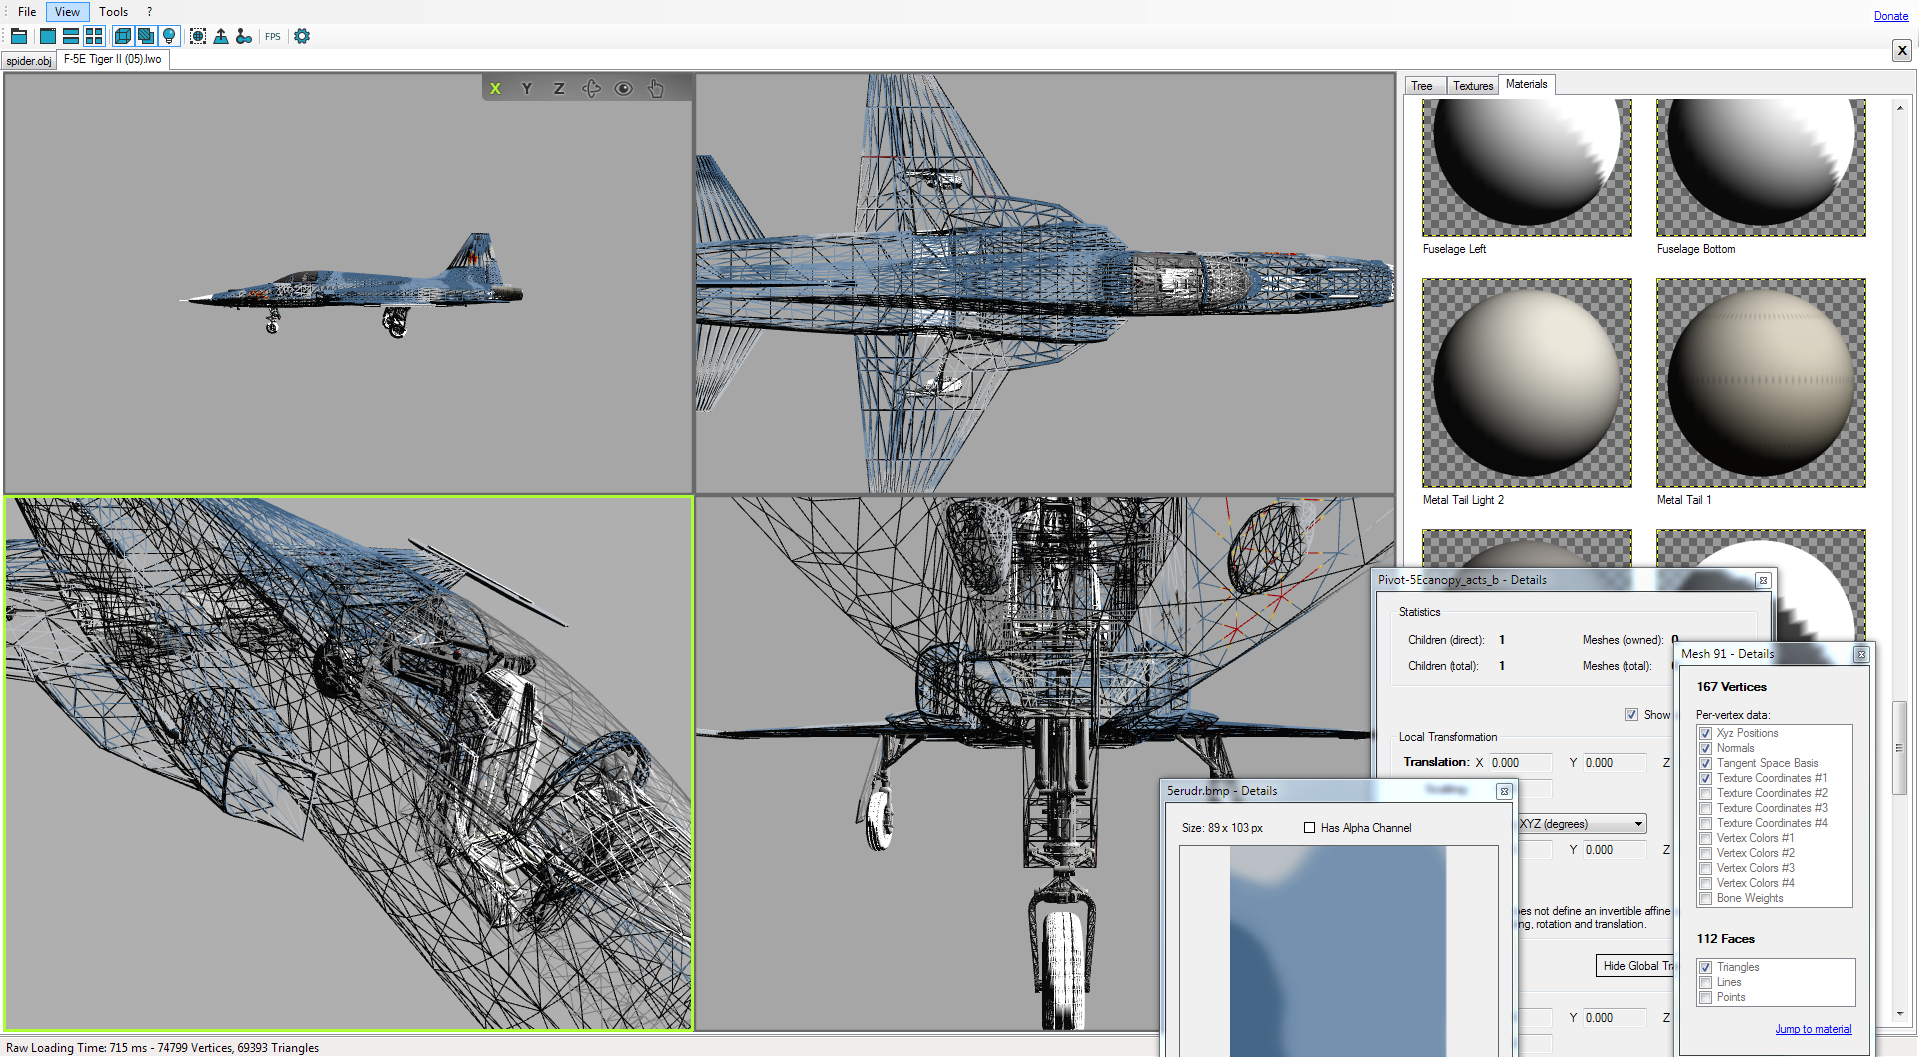 Non Blender Open 3d Model Viewer Supports 40 File Formats